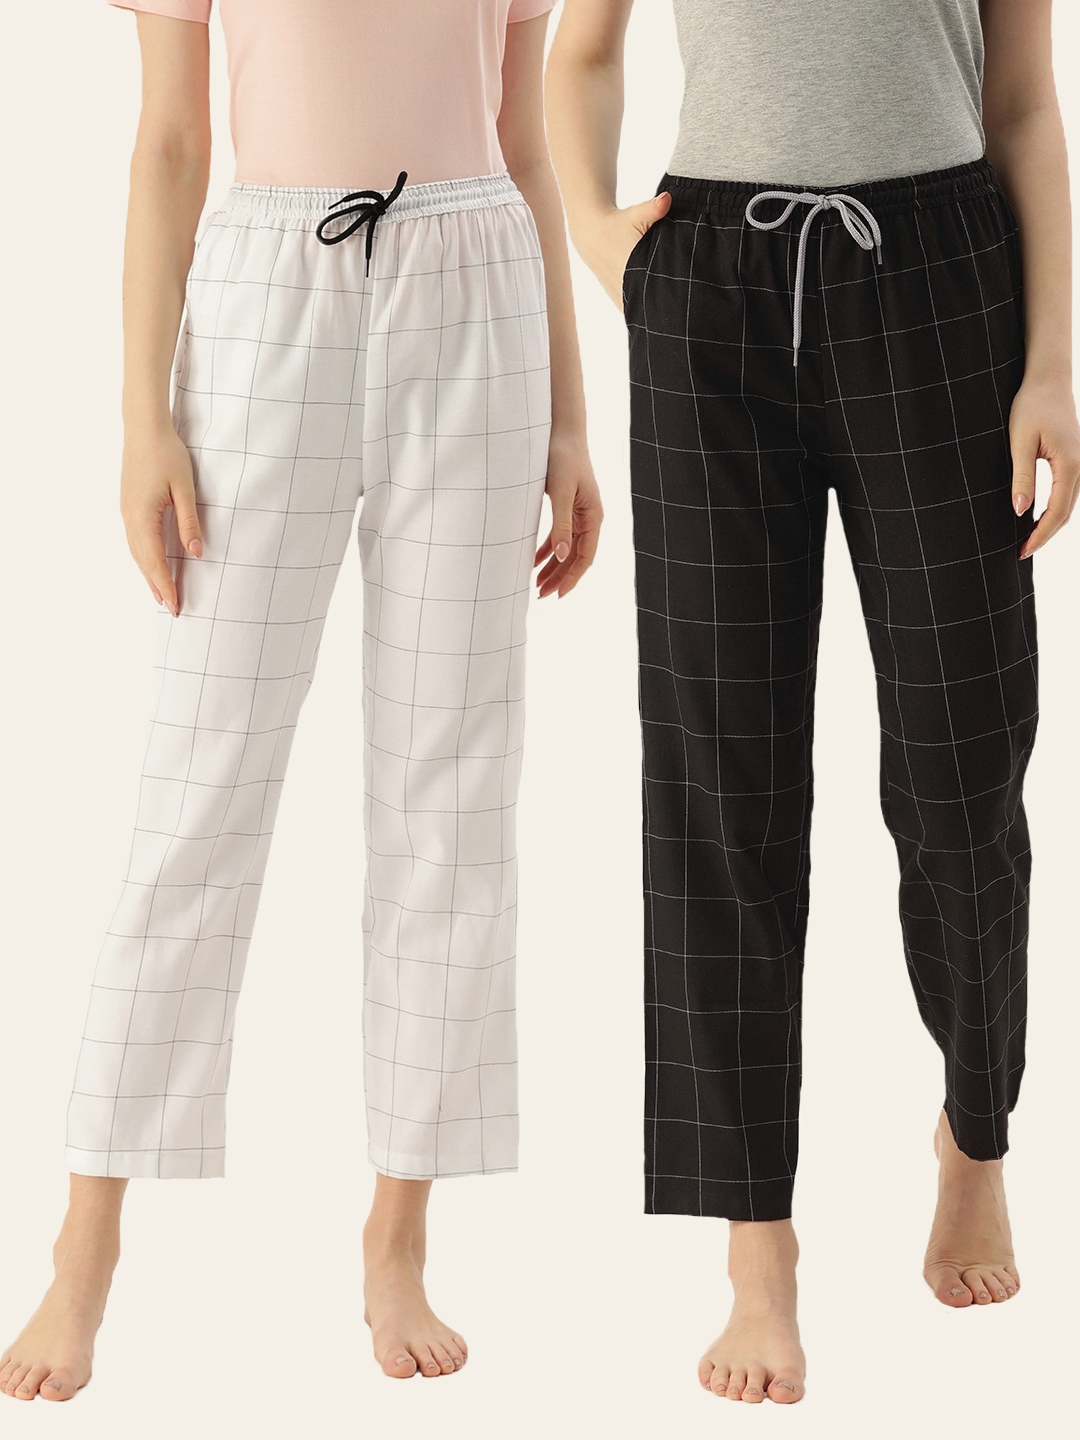 Kryptic | Kryptic Women's 100% Cotton Checked Lounge Pants - Pack of 2